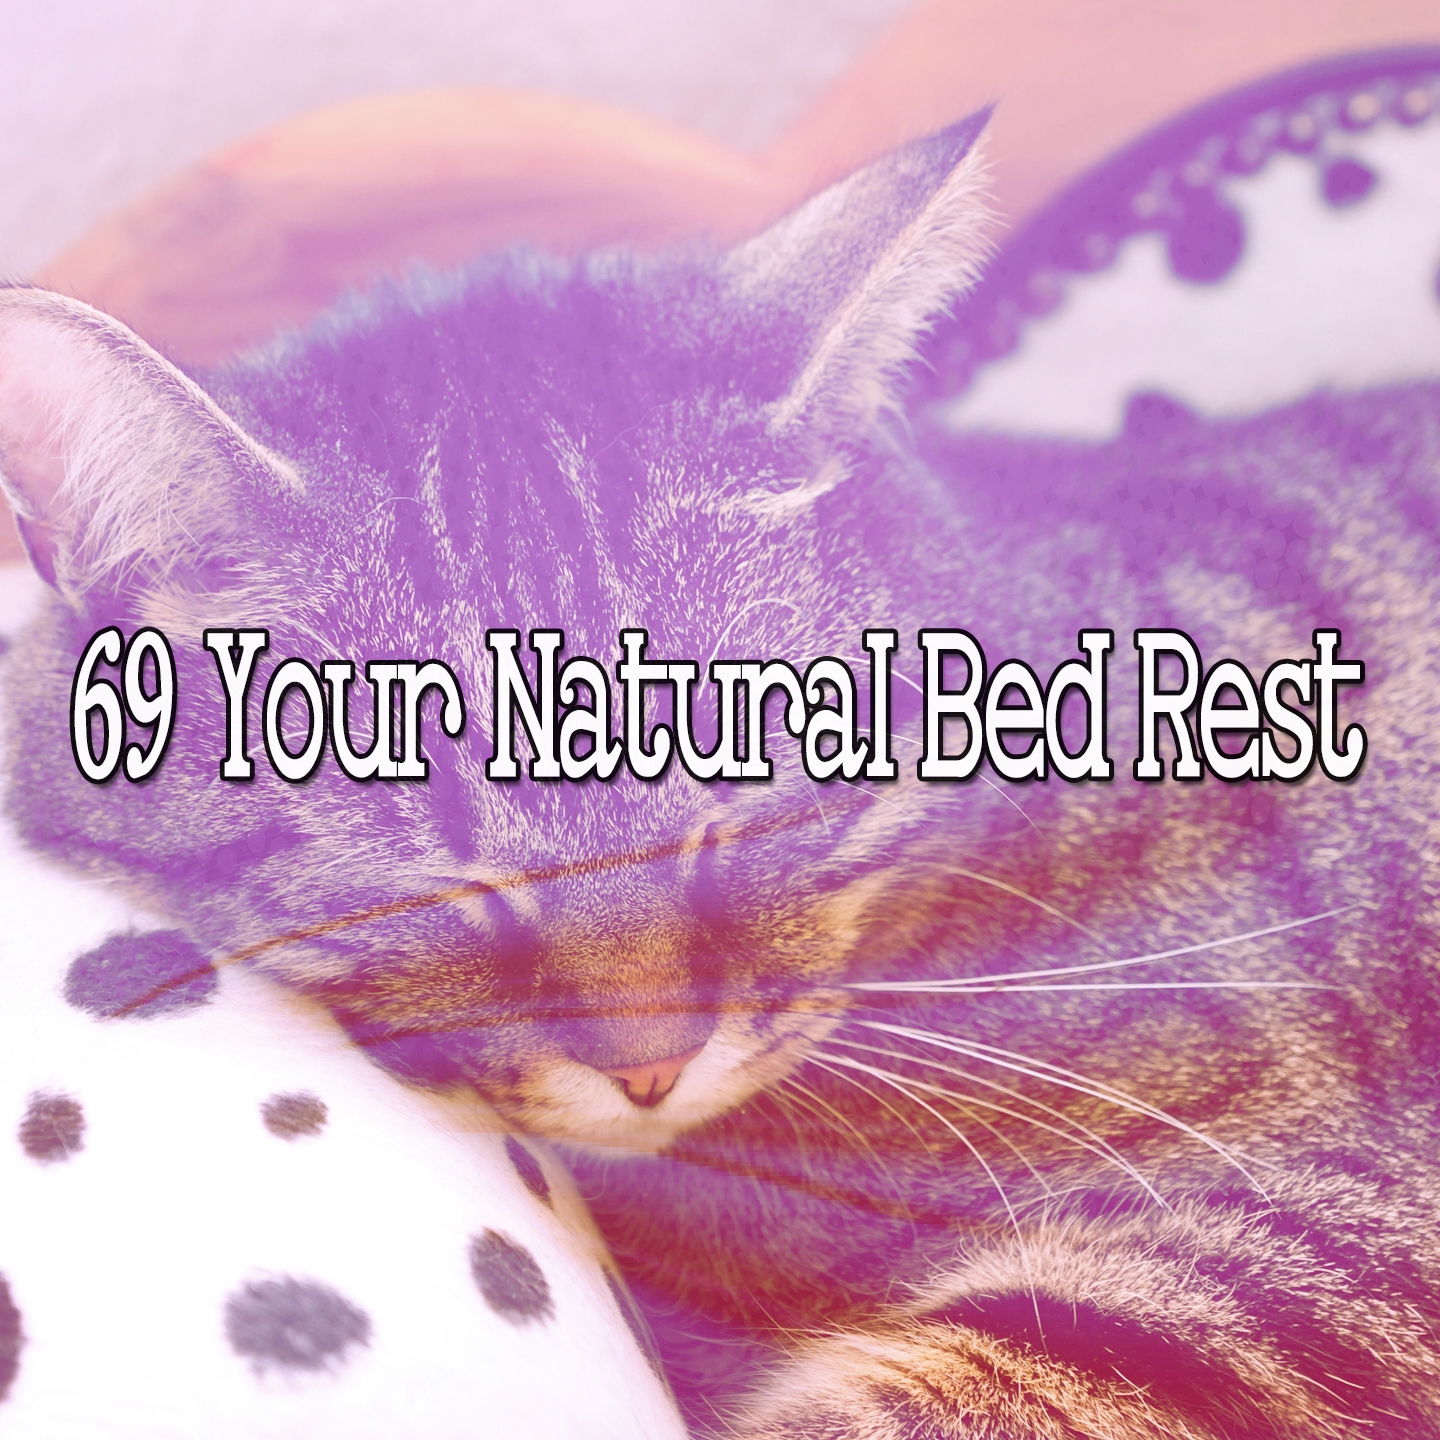 69 Your Natural Bed Rest